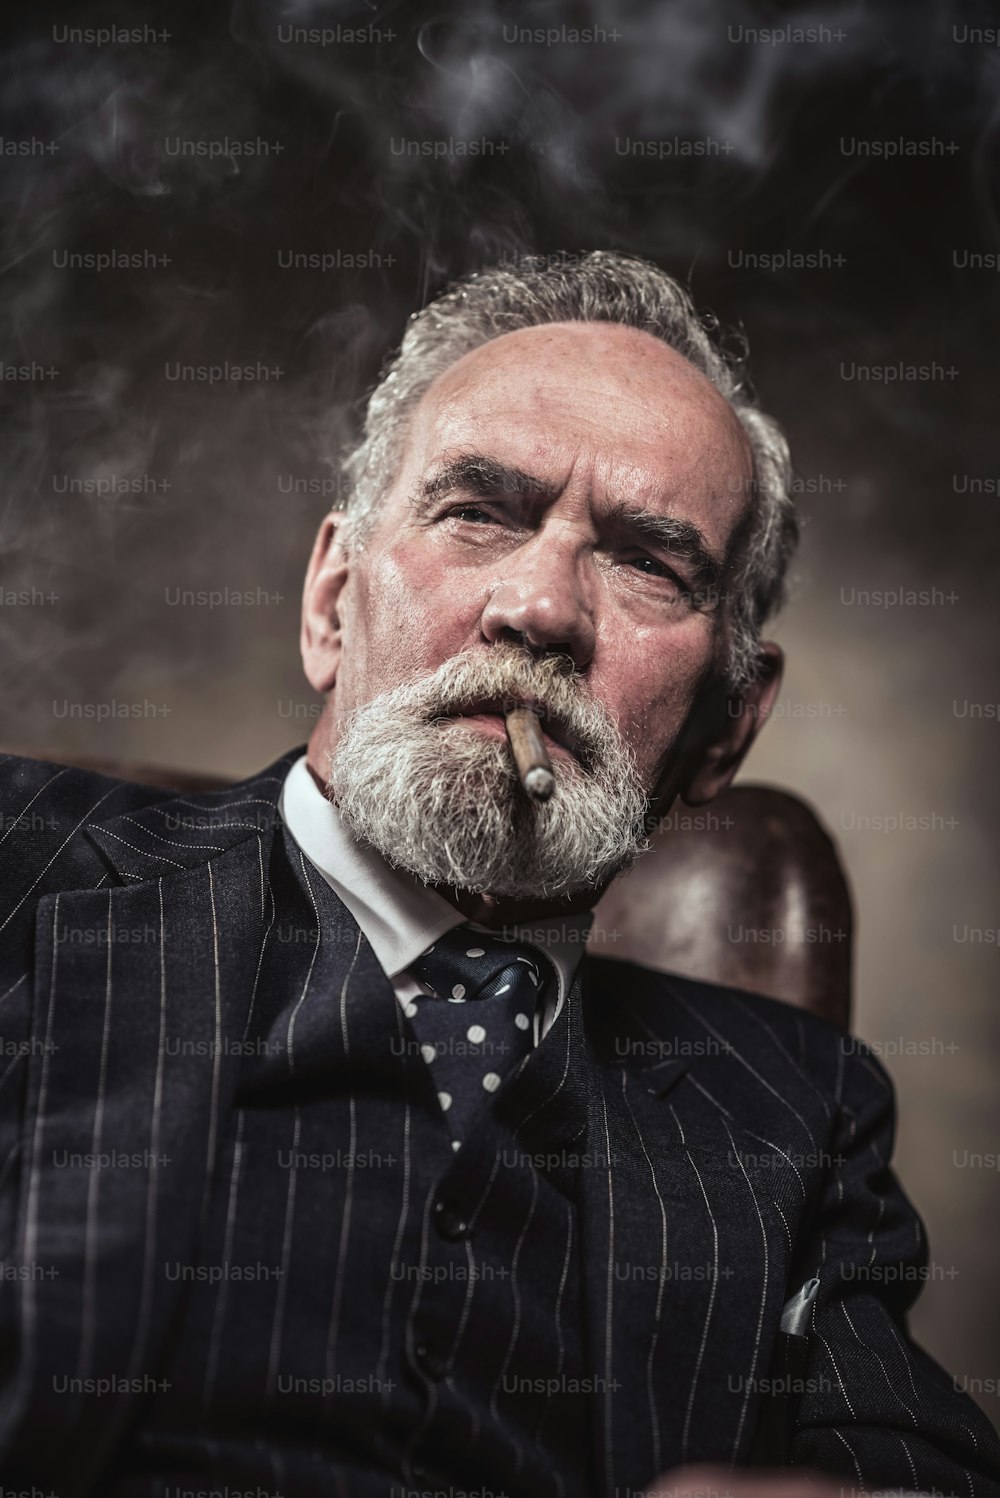 In chair sitting characteristic senior business man. Smoking cigar. Gray hair and beard wearing blue striped suit and tie. Against brown wall.